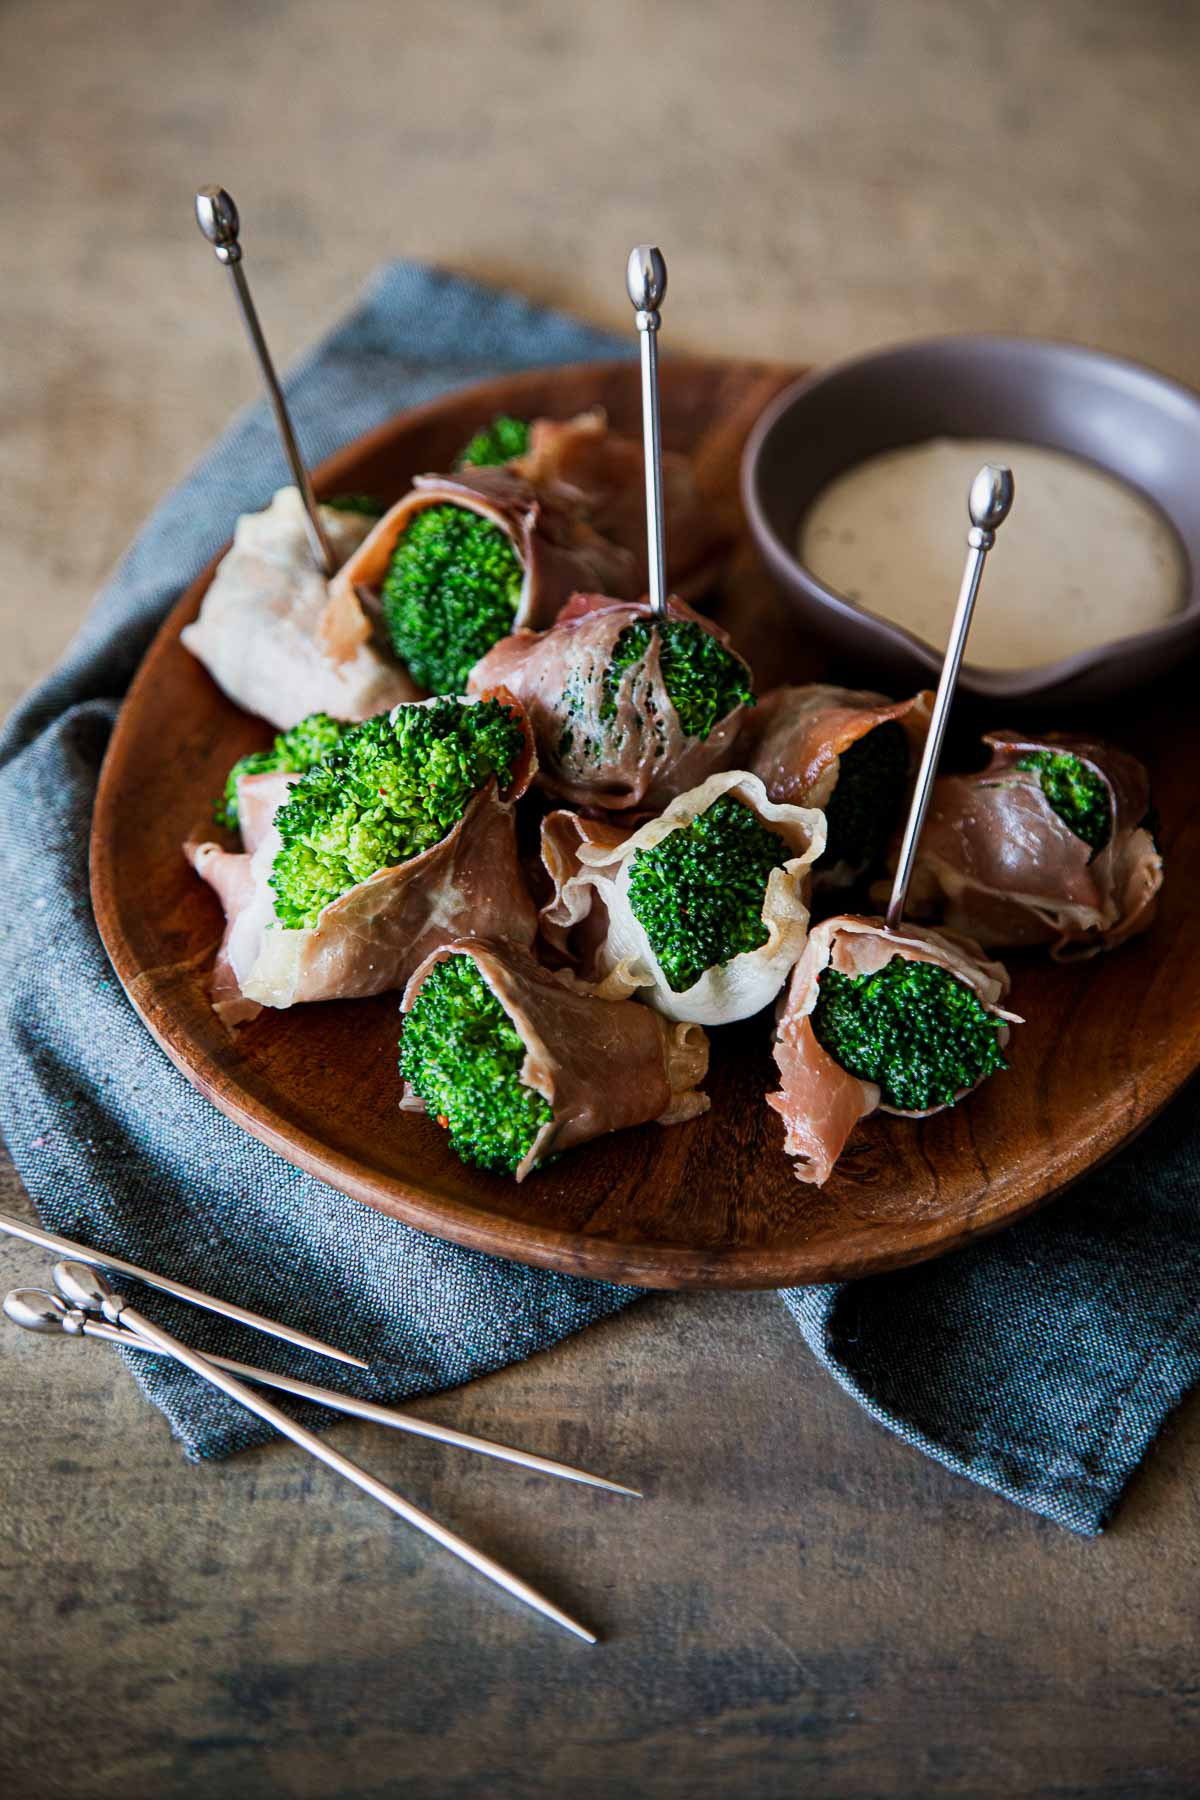 Prosciutto Broccoli Appetizer on Plate with Skewers